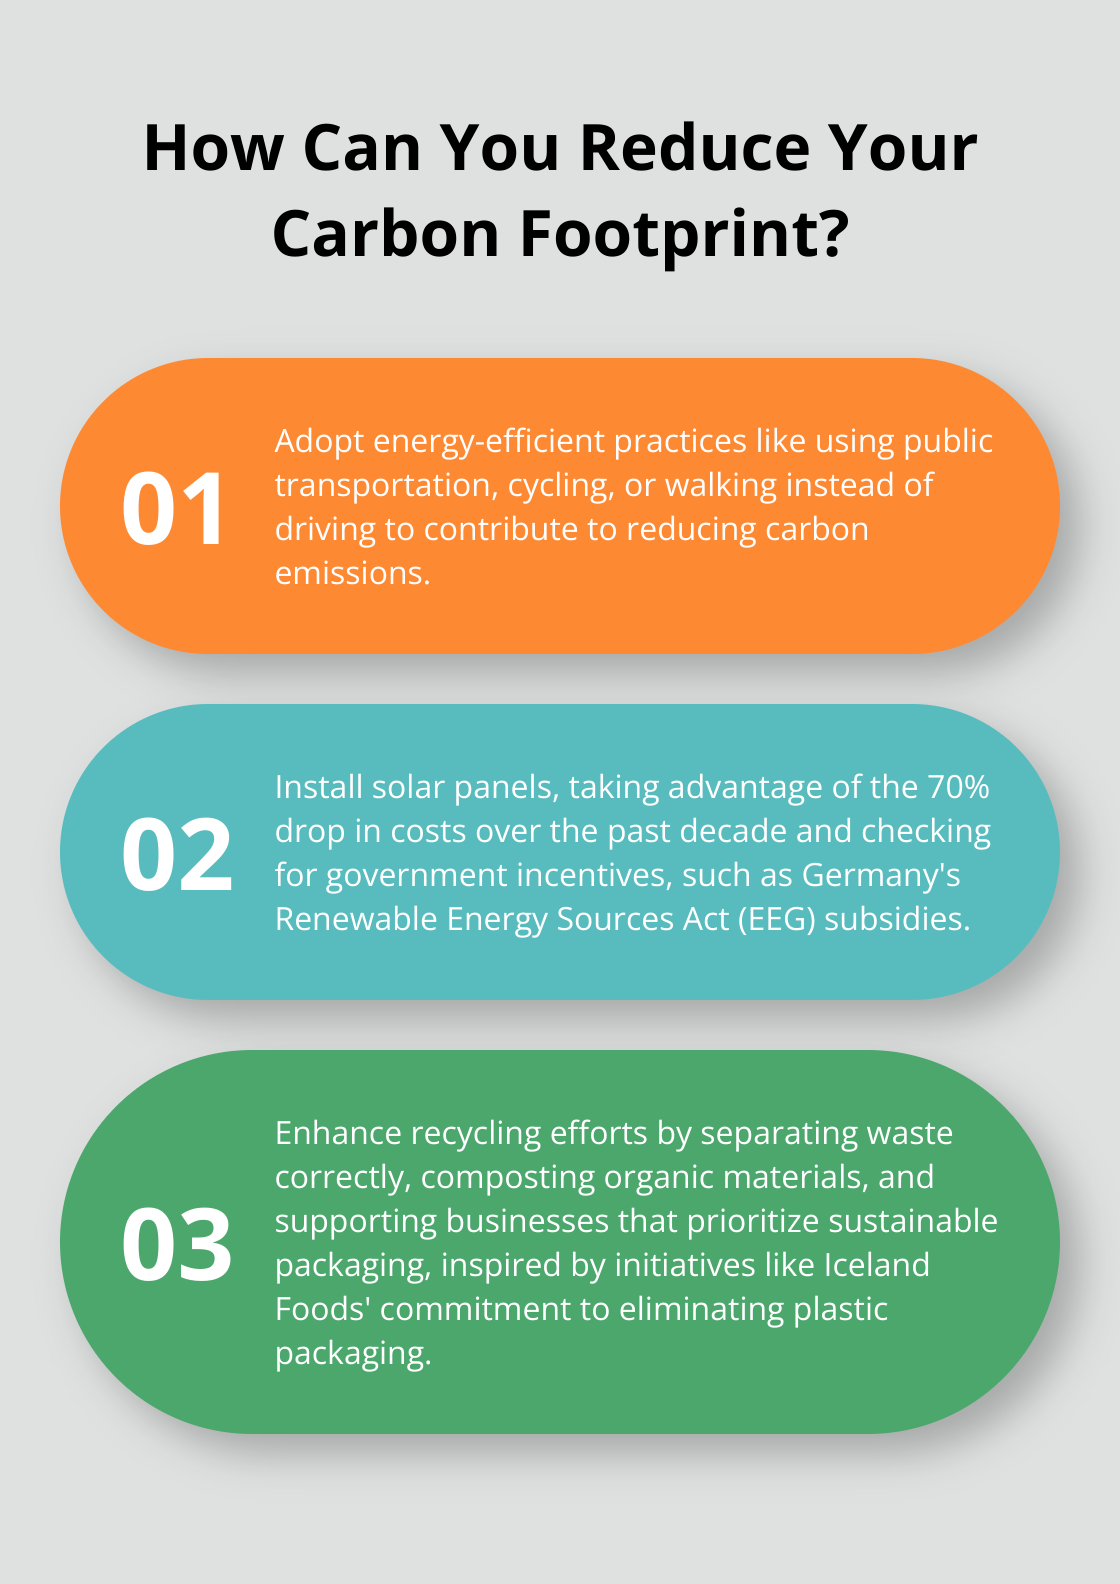 Fact - How Can You Reduce Your Carbon Footprint?